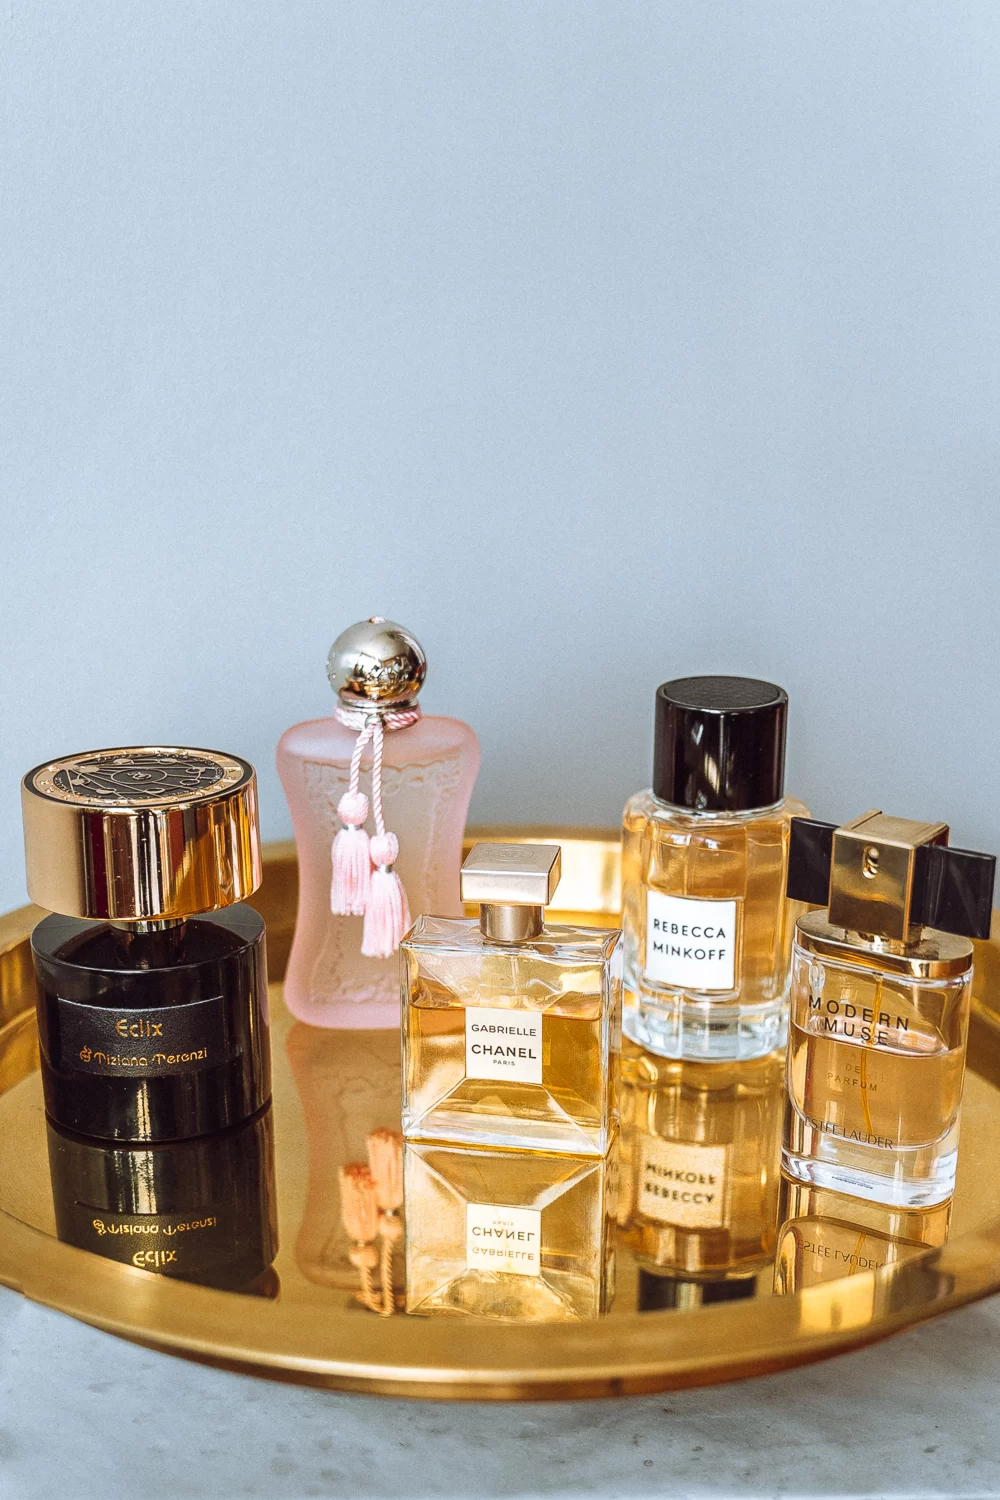 5 Spring/Summer Perfumes to Add to Your Collection - OpalbyOpal